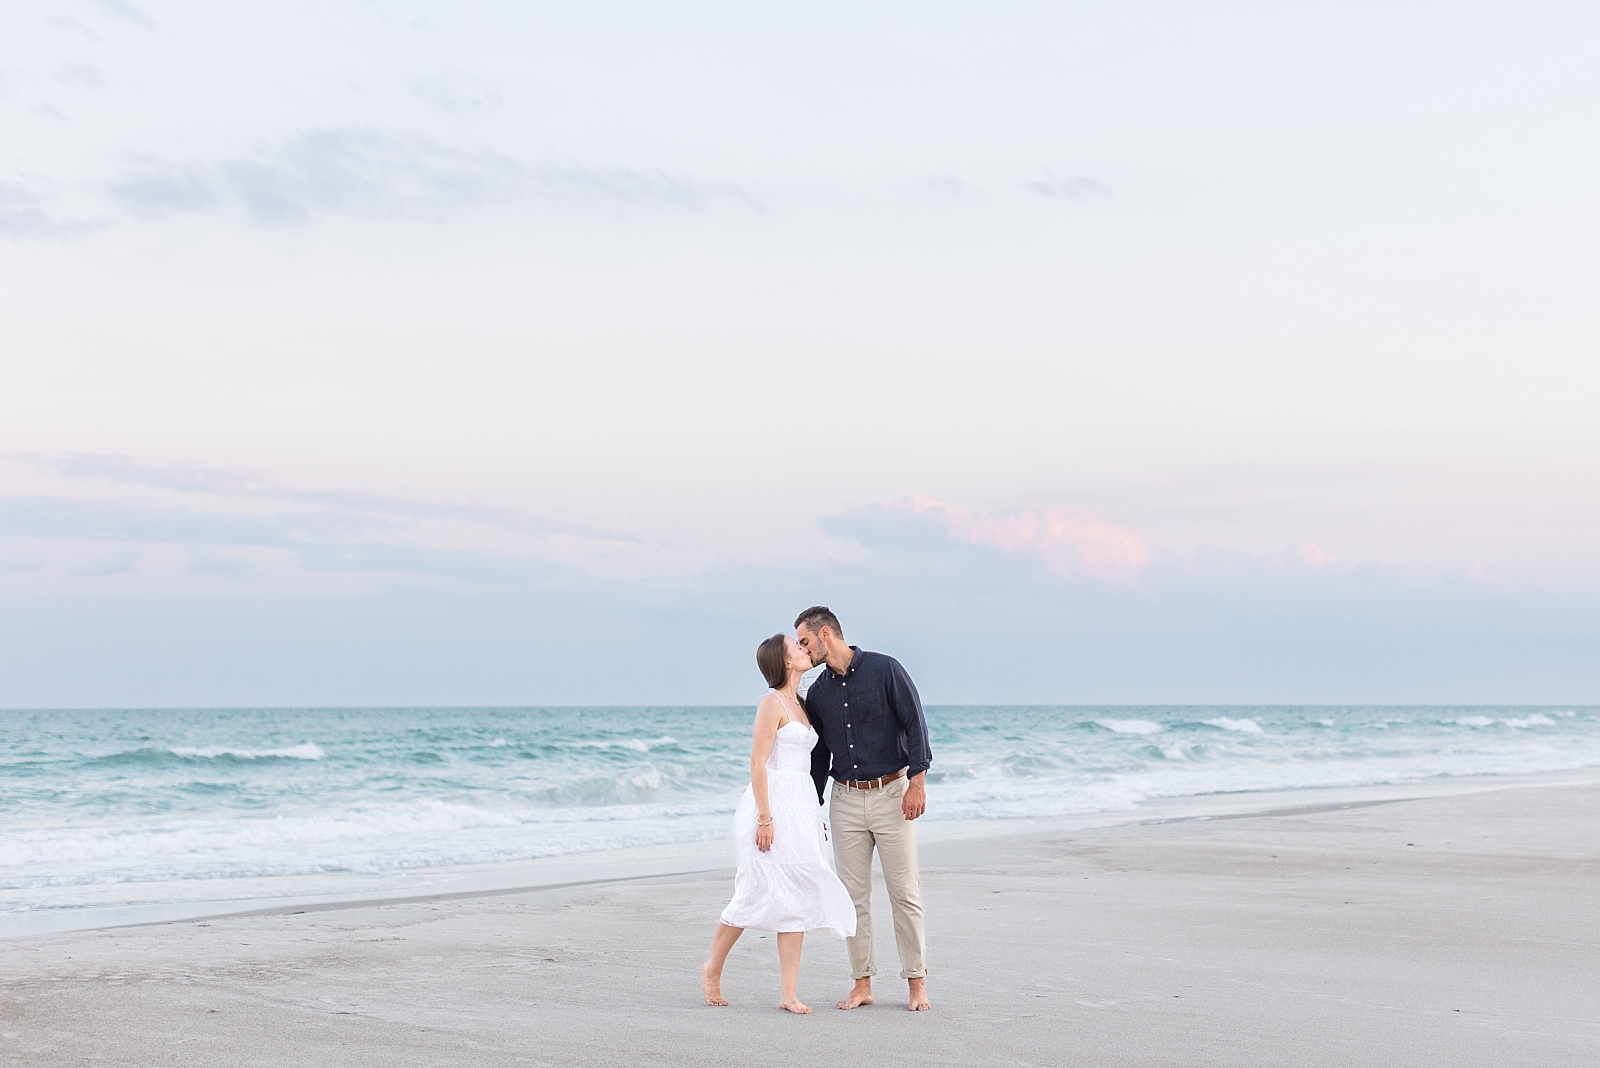 Engagement photos on the beach at Topsail during sunset with pink skies | Raleigh North Carolina Wedding Photographer